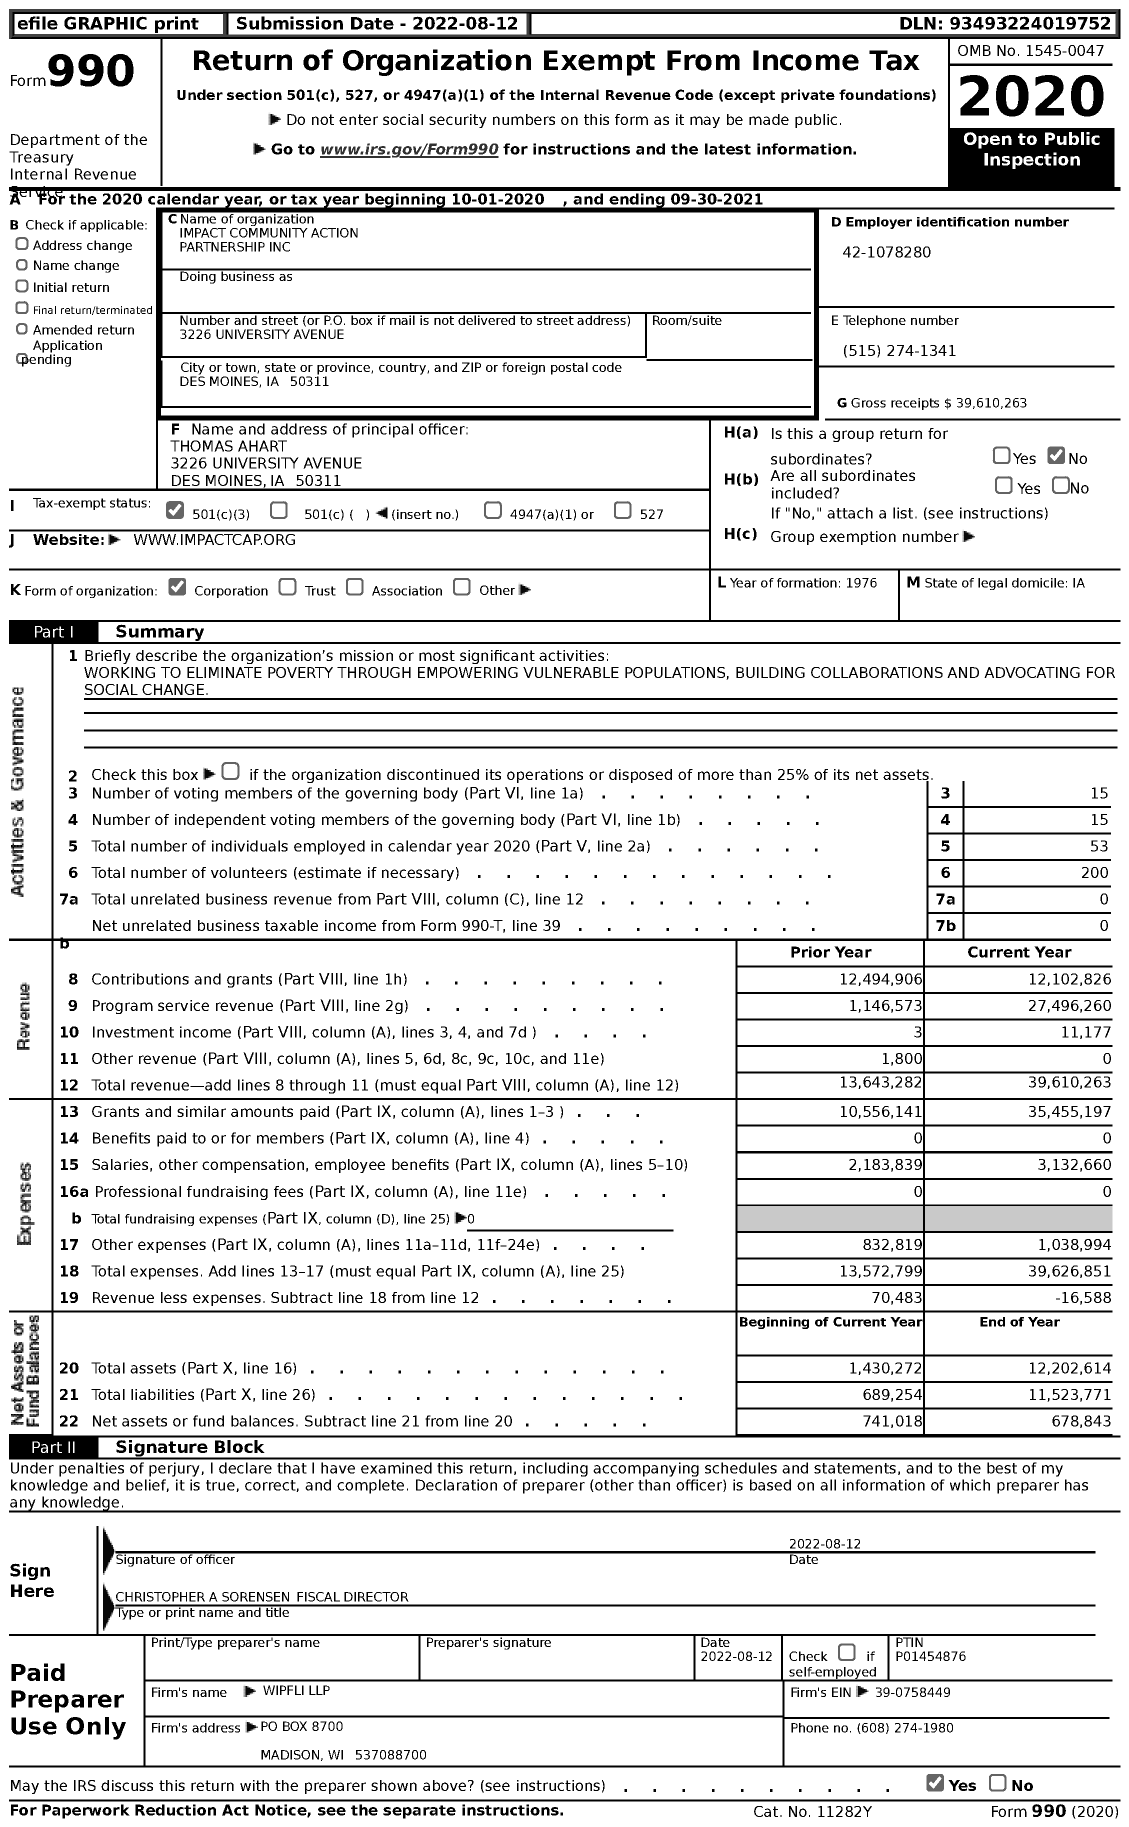 Image of first page of 2020 Form 990 for IMPACT Community Action Partnership